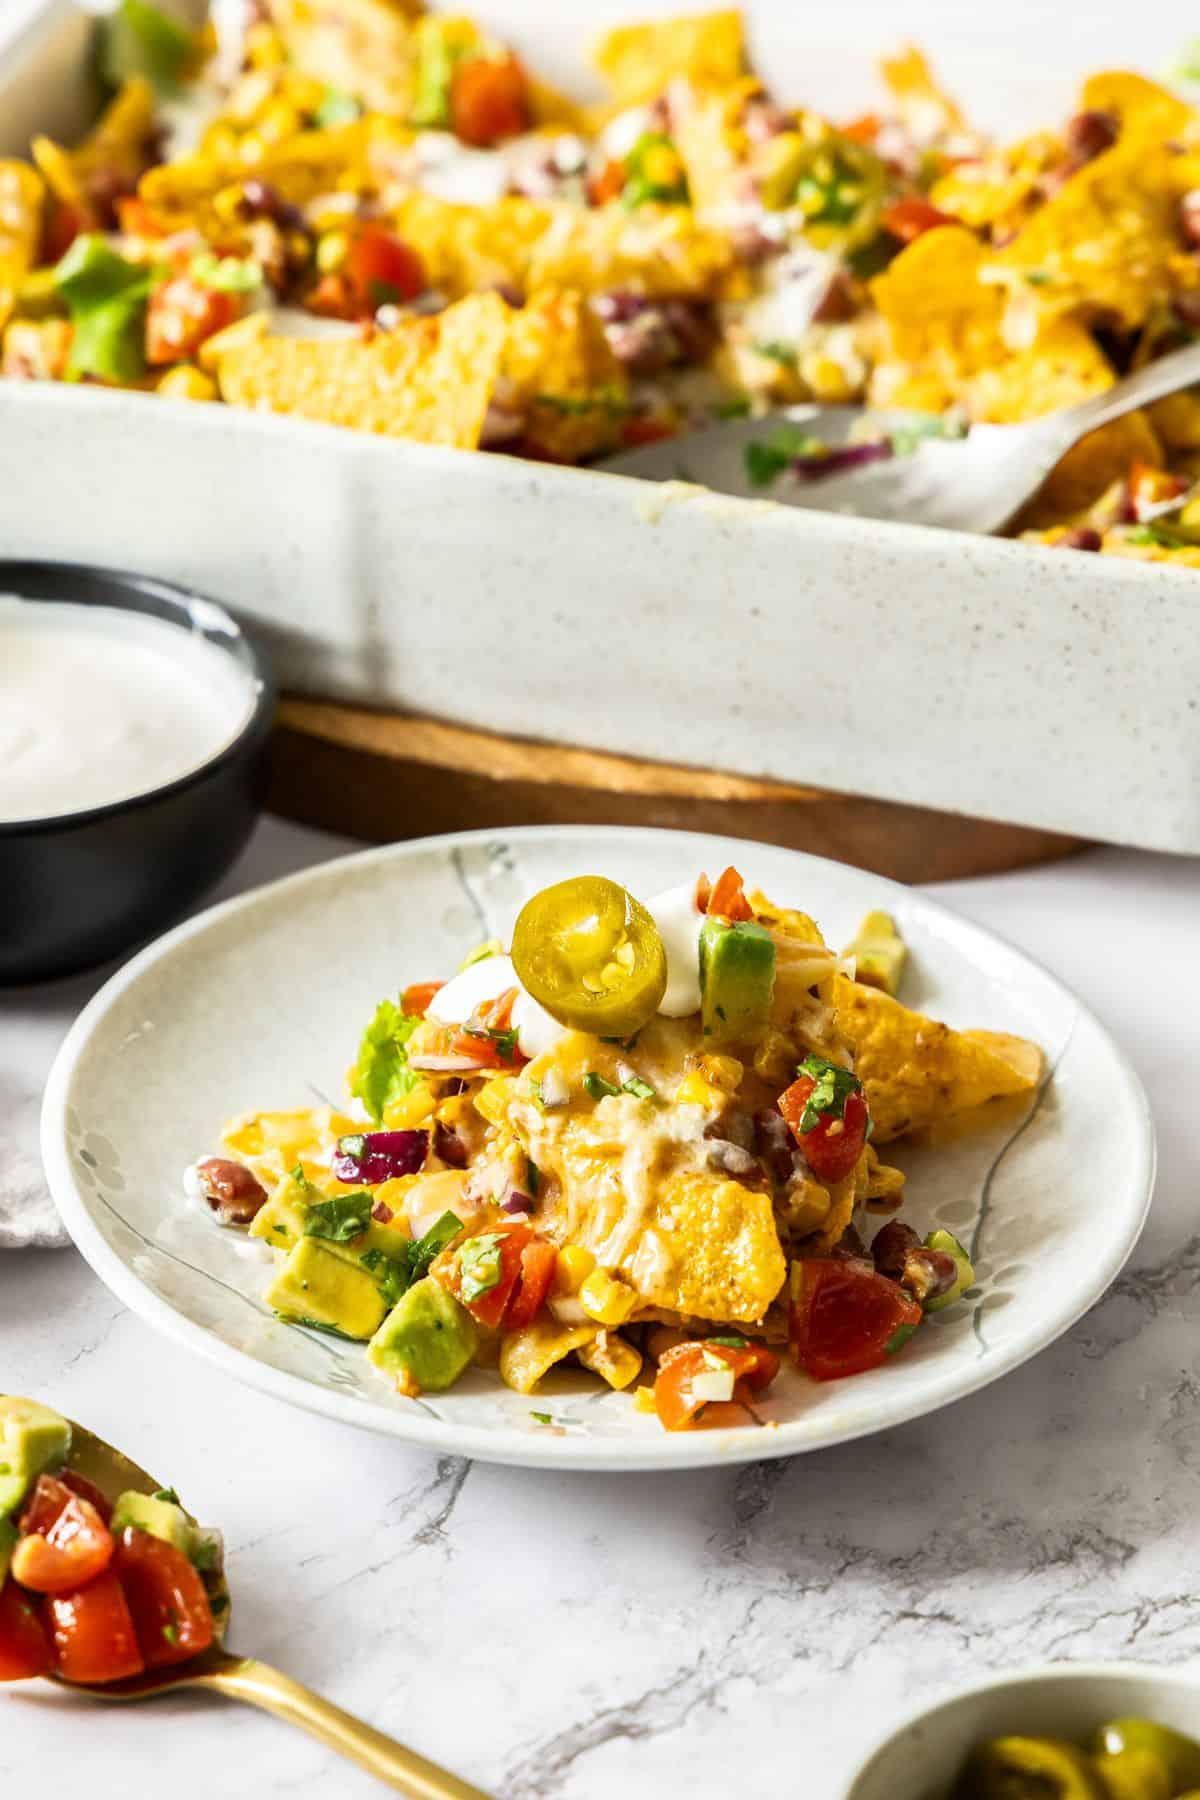 Small round white plate with a serving of Vegetarian Nachos, with the baking dish of nachos in the background.